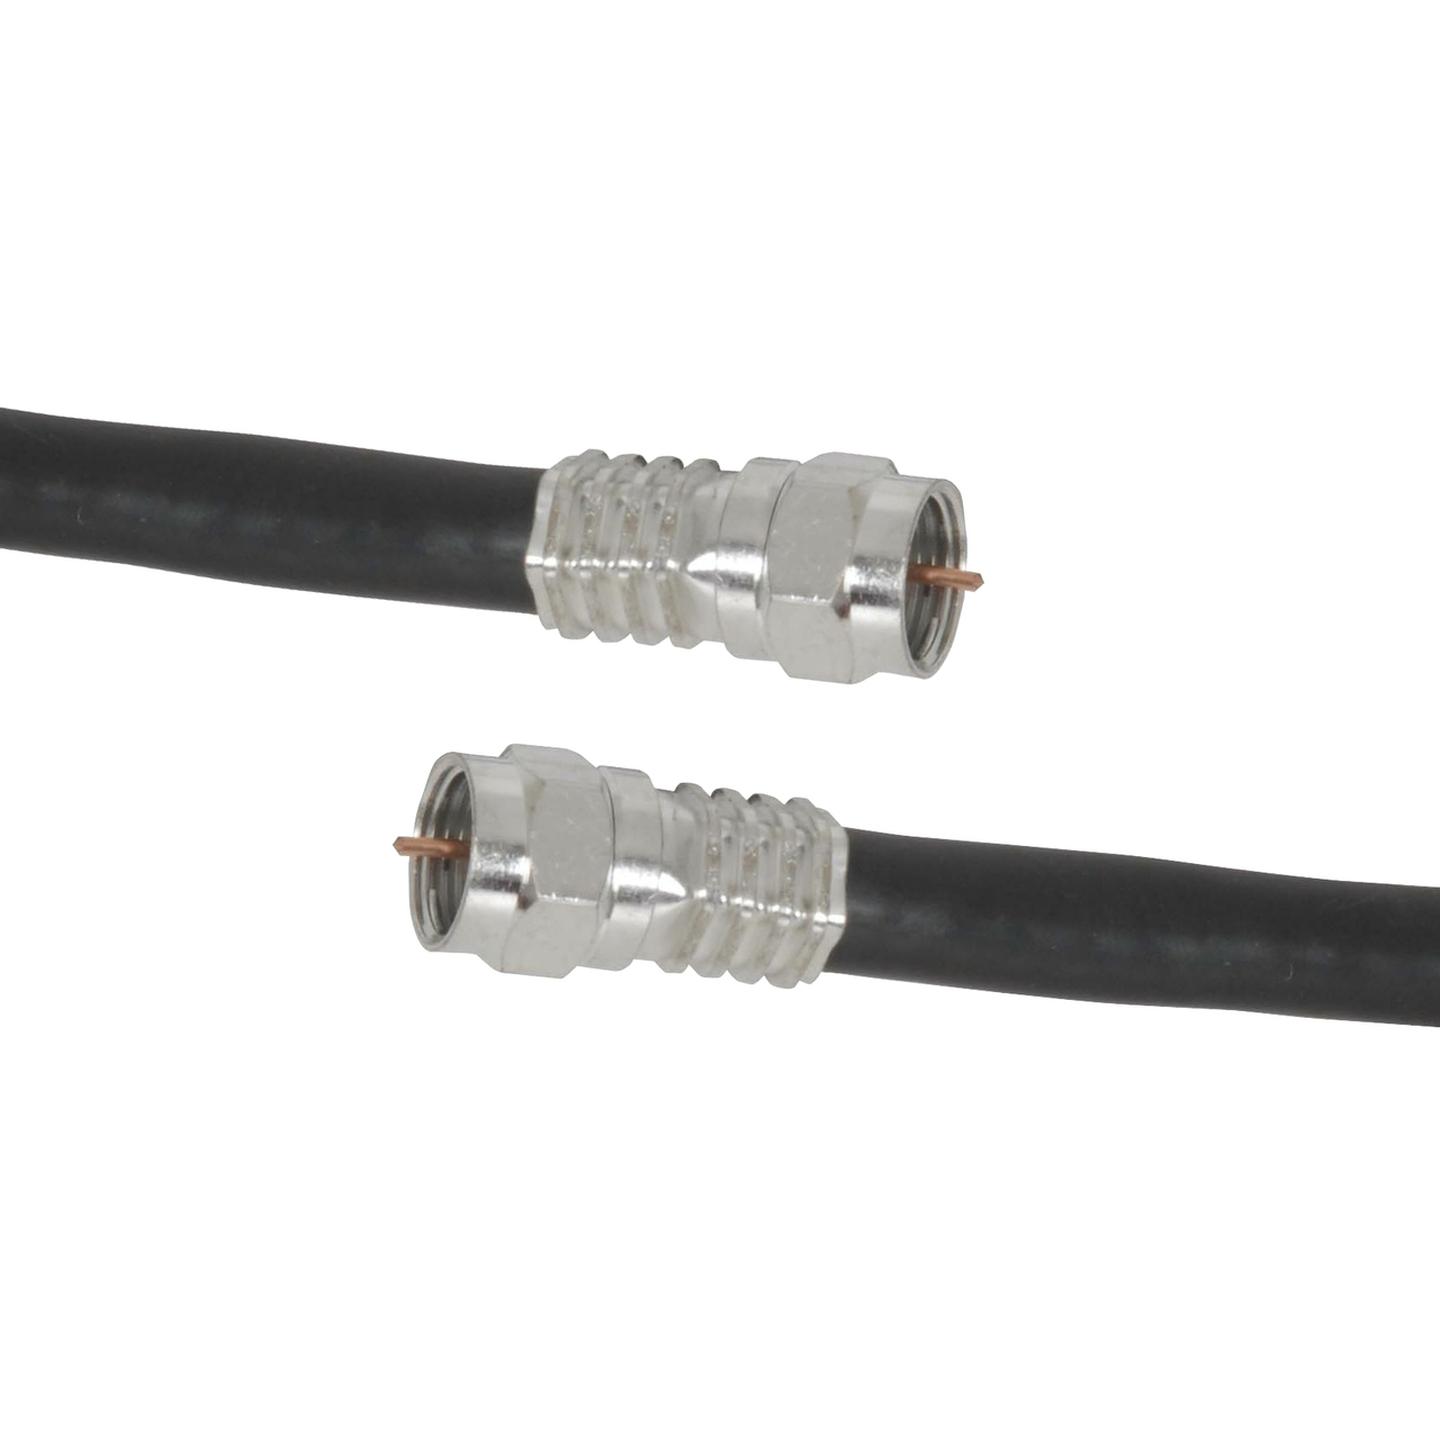 5m High Quality RG6 Quad Shield Cable with Crimped Connectors